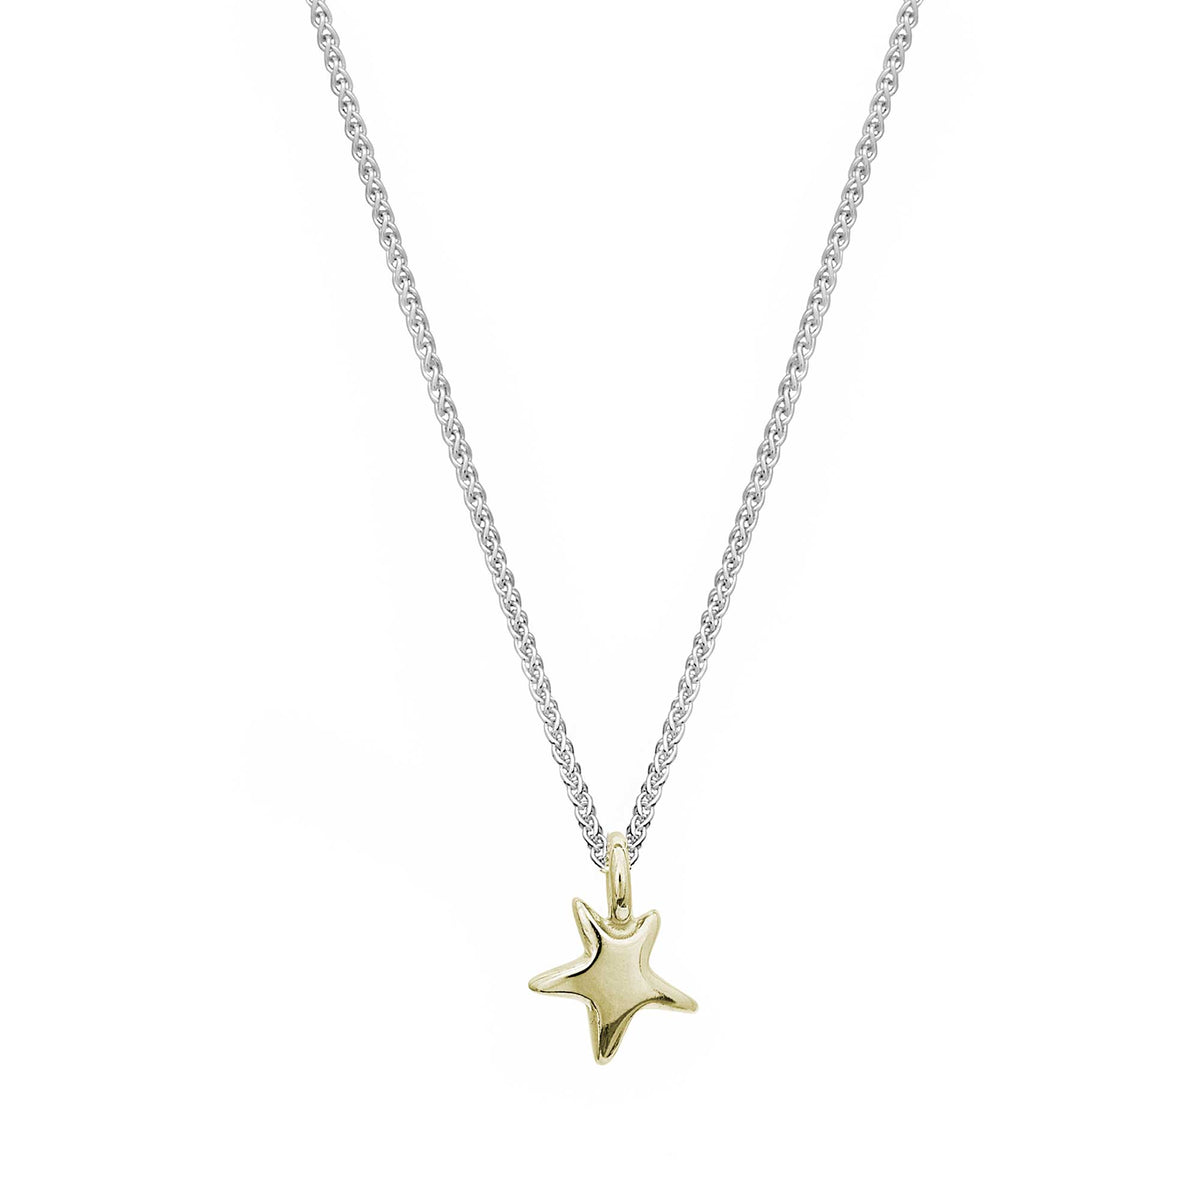 Delicate solid gold and silver star pendant for teens young womens gift designer Scarlett Jewellery